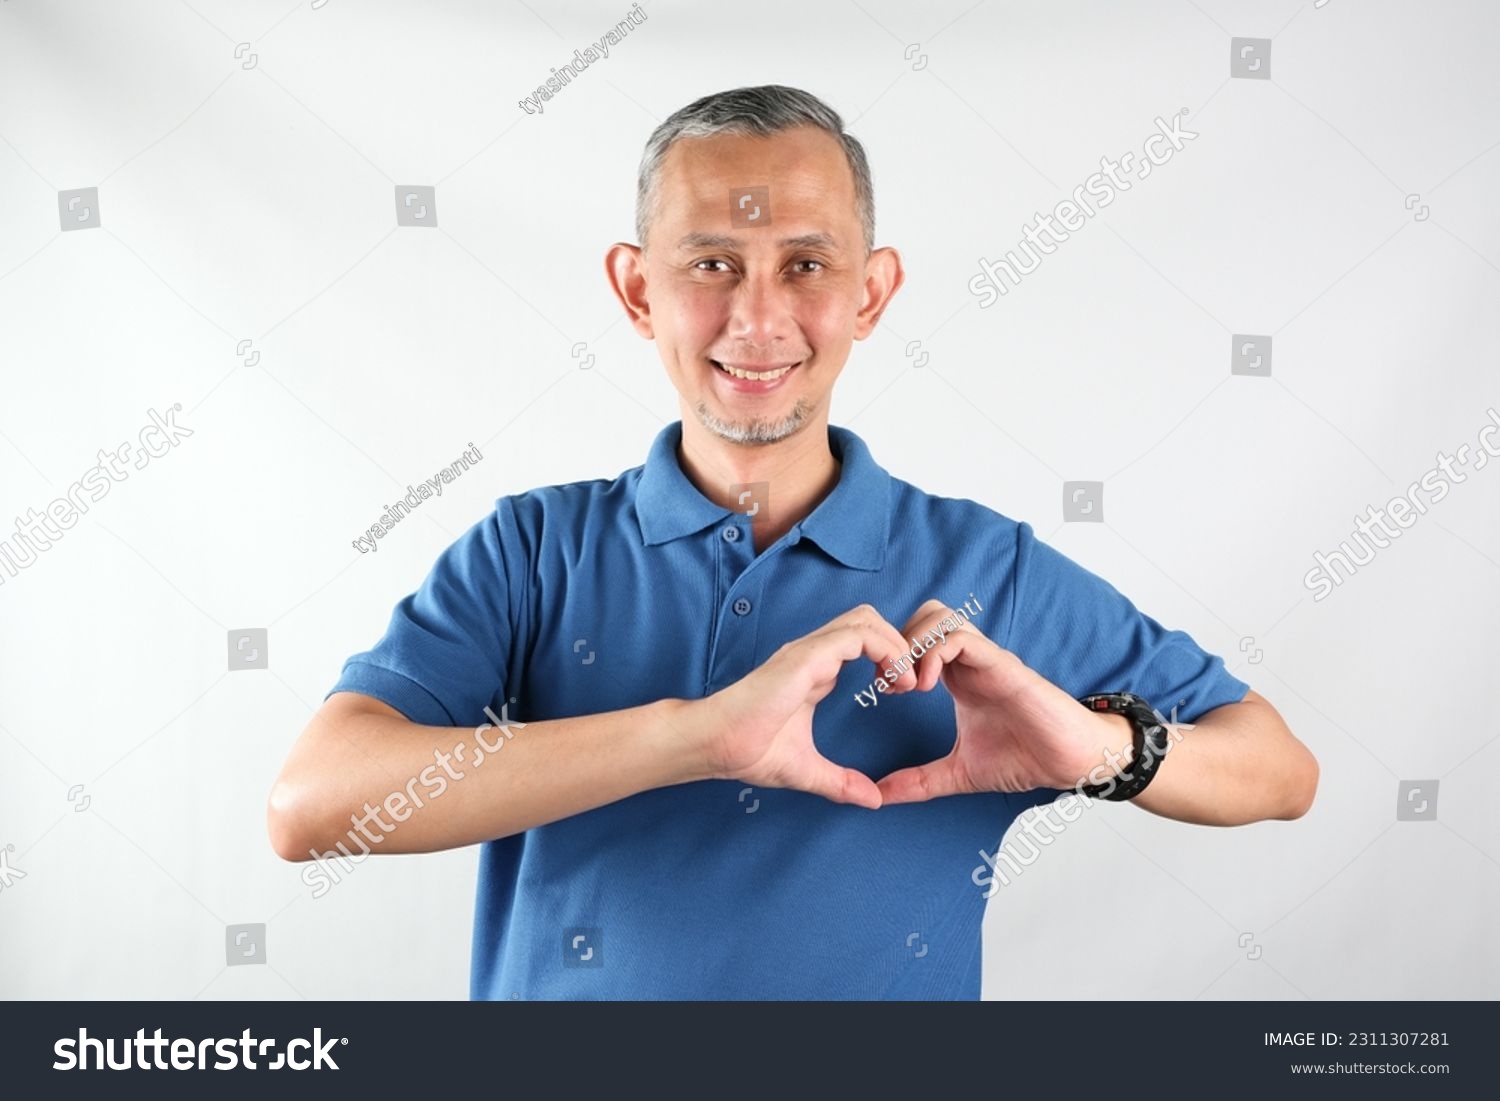 Portrait of Asian man wearing blue tshirt smiling with love sign (heart with fingers) on his chest, health concept.
 #2311307281